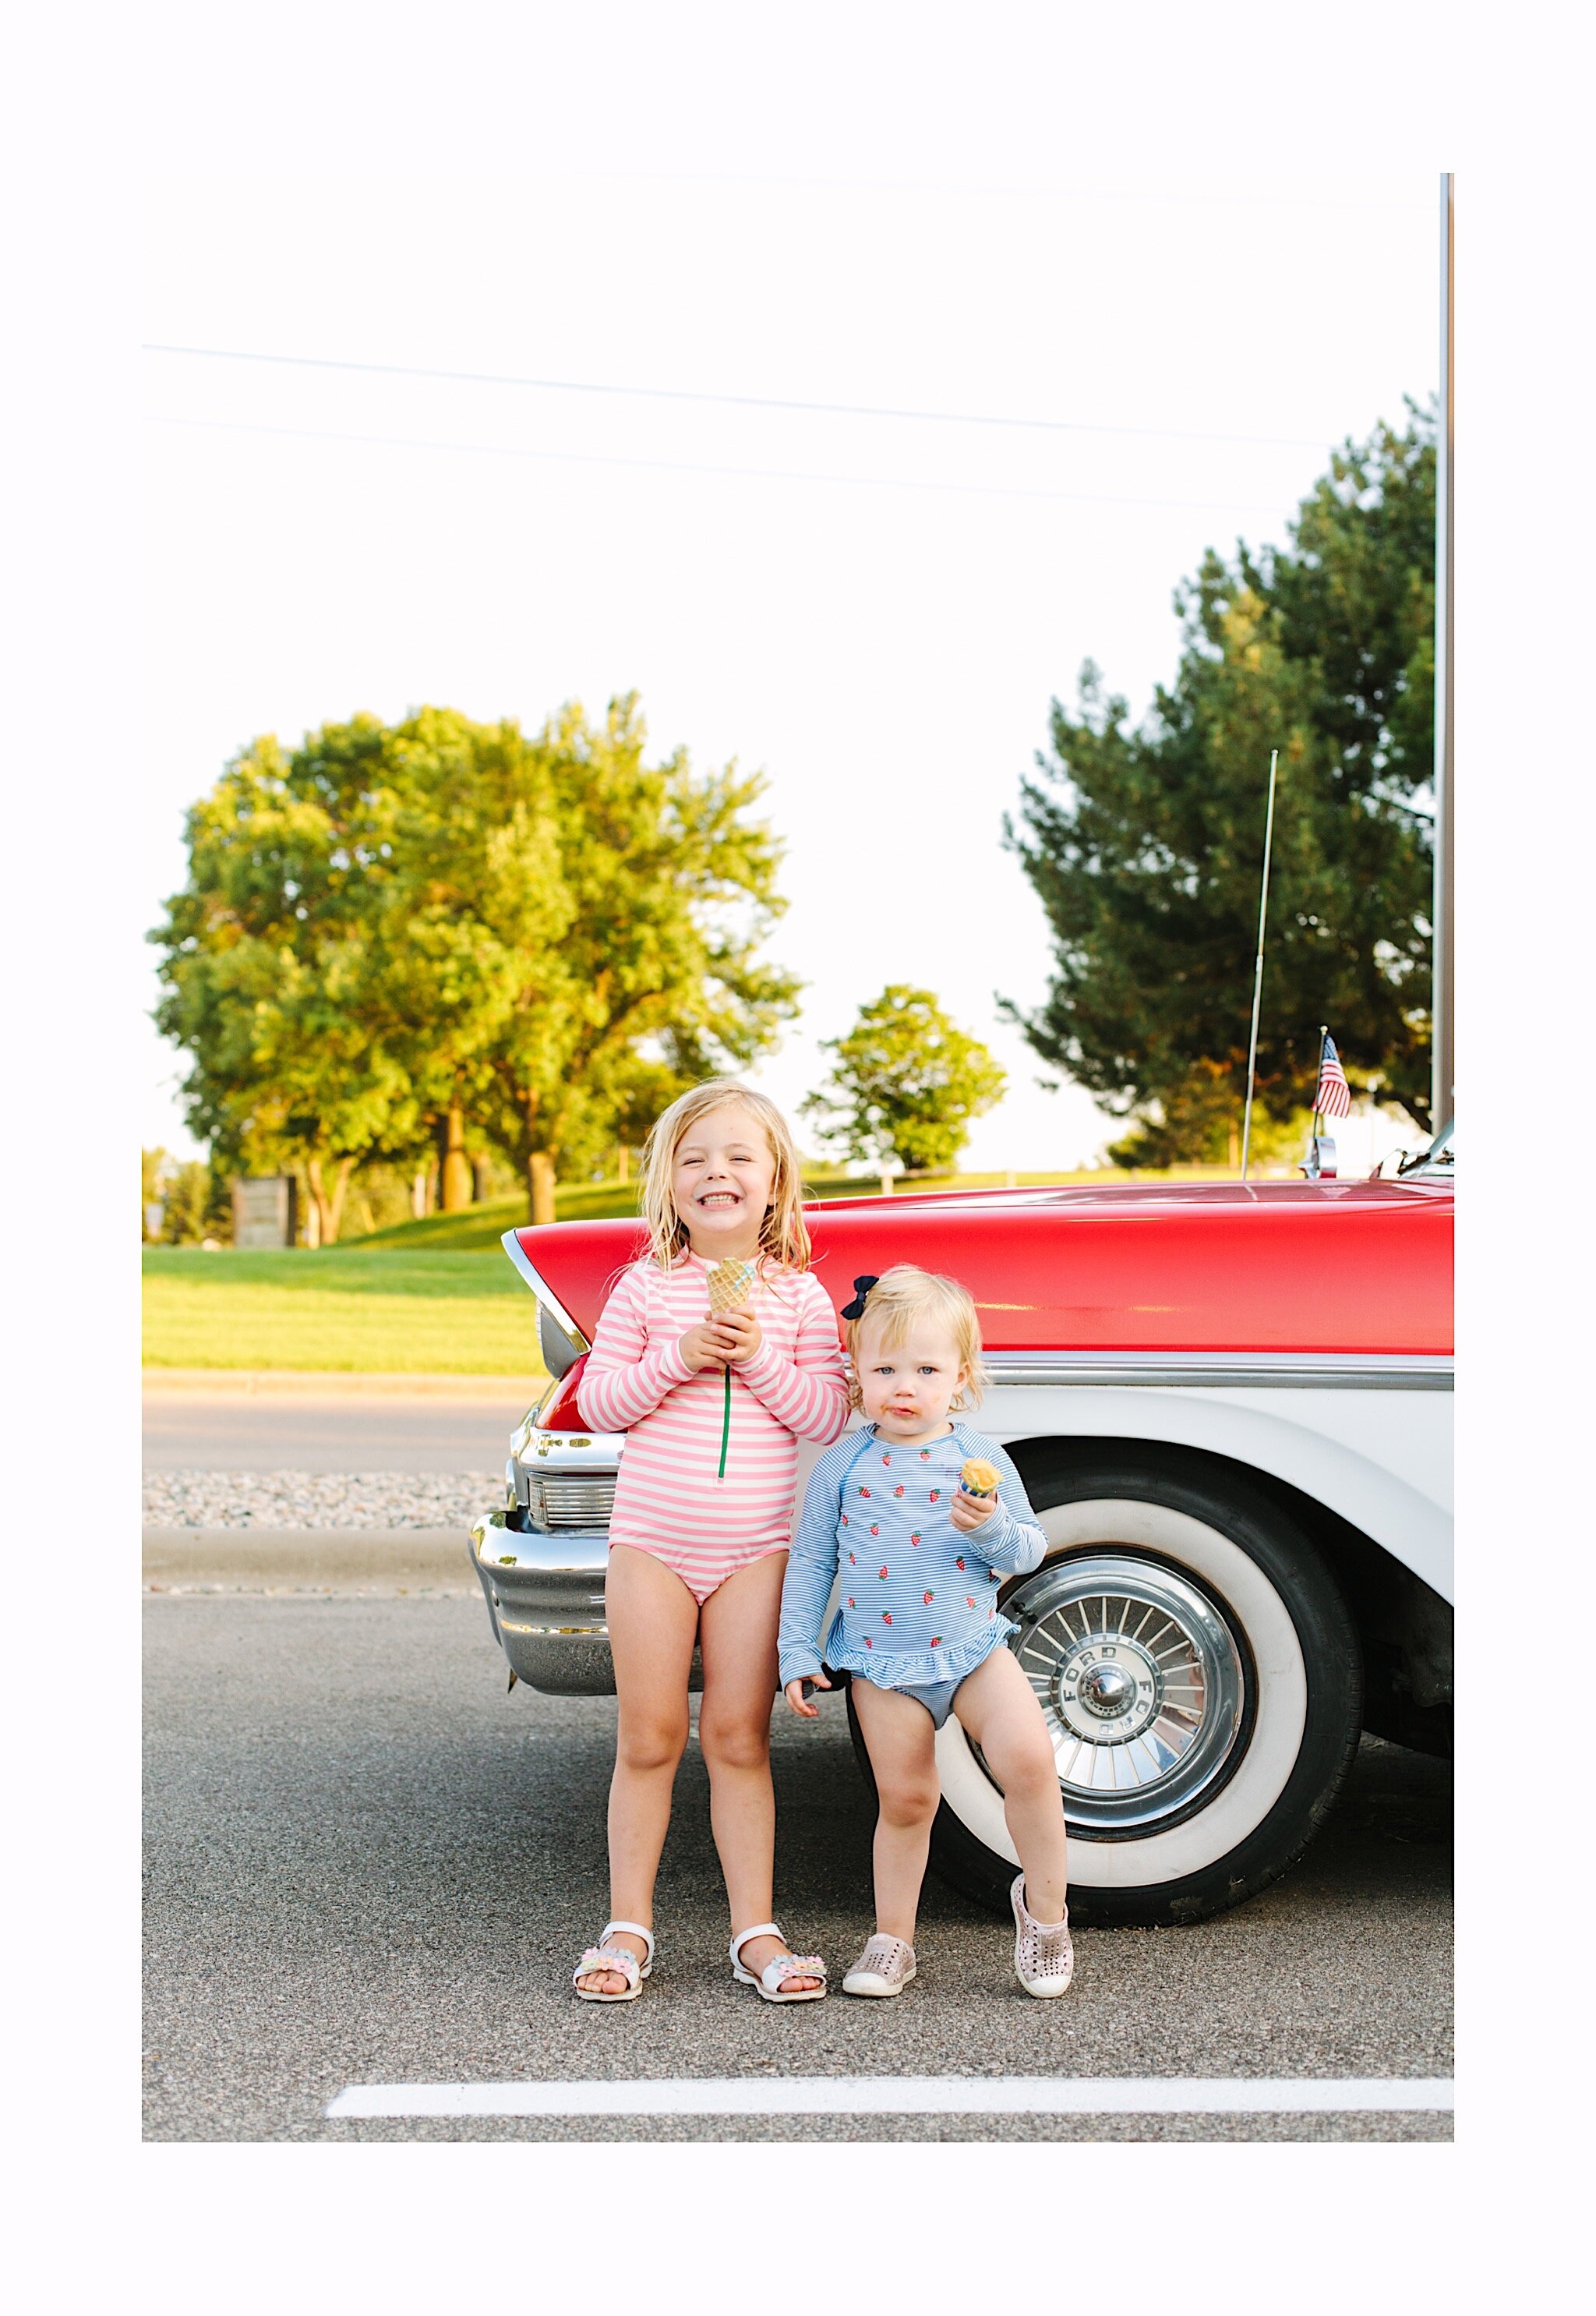 Photo of two sisters eating ice cream by a red and white vintage car